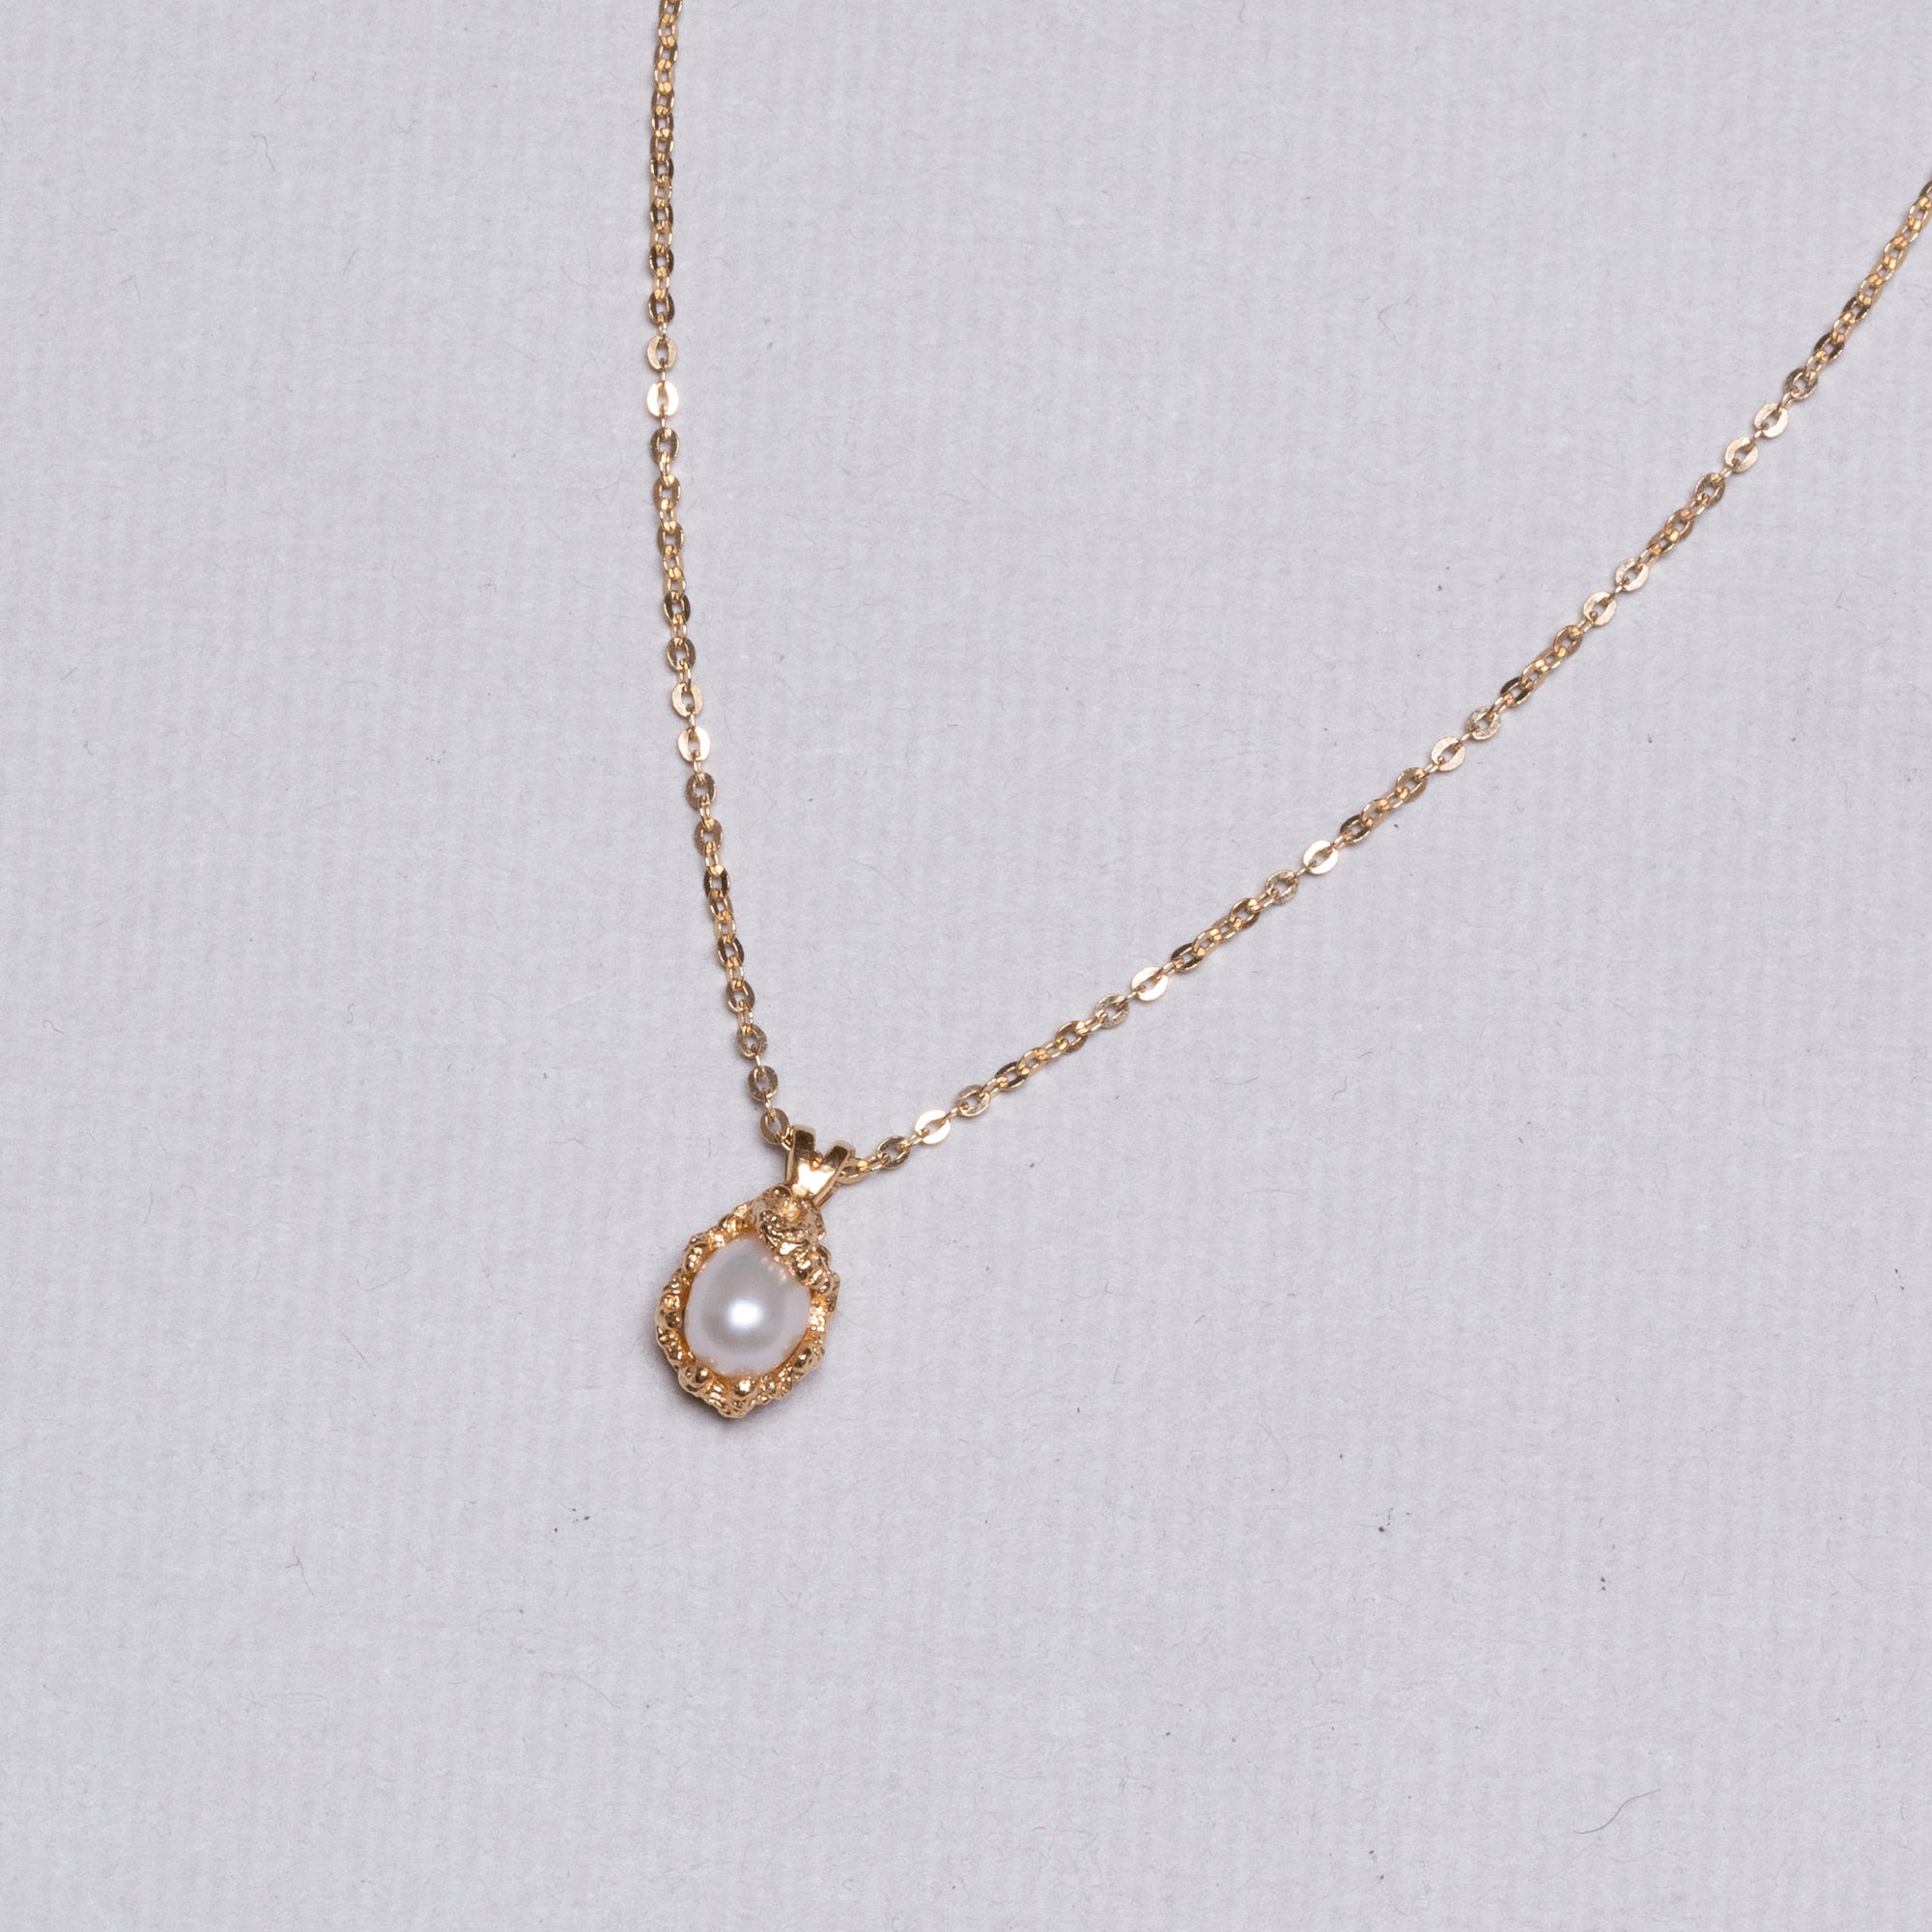 Vintage Mikimoto Pearl and Gold Necklace